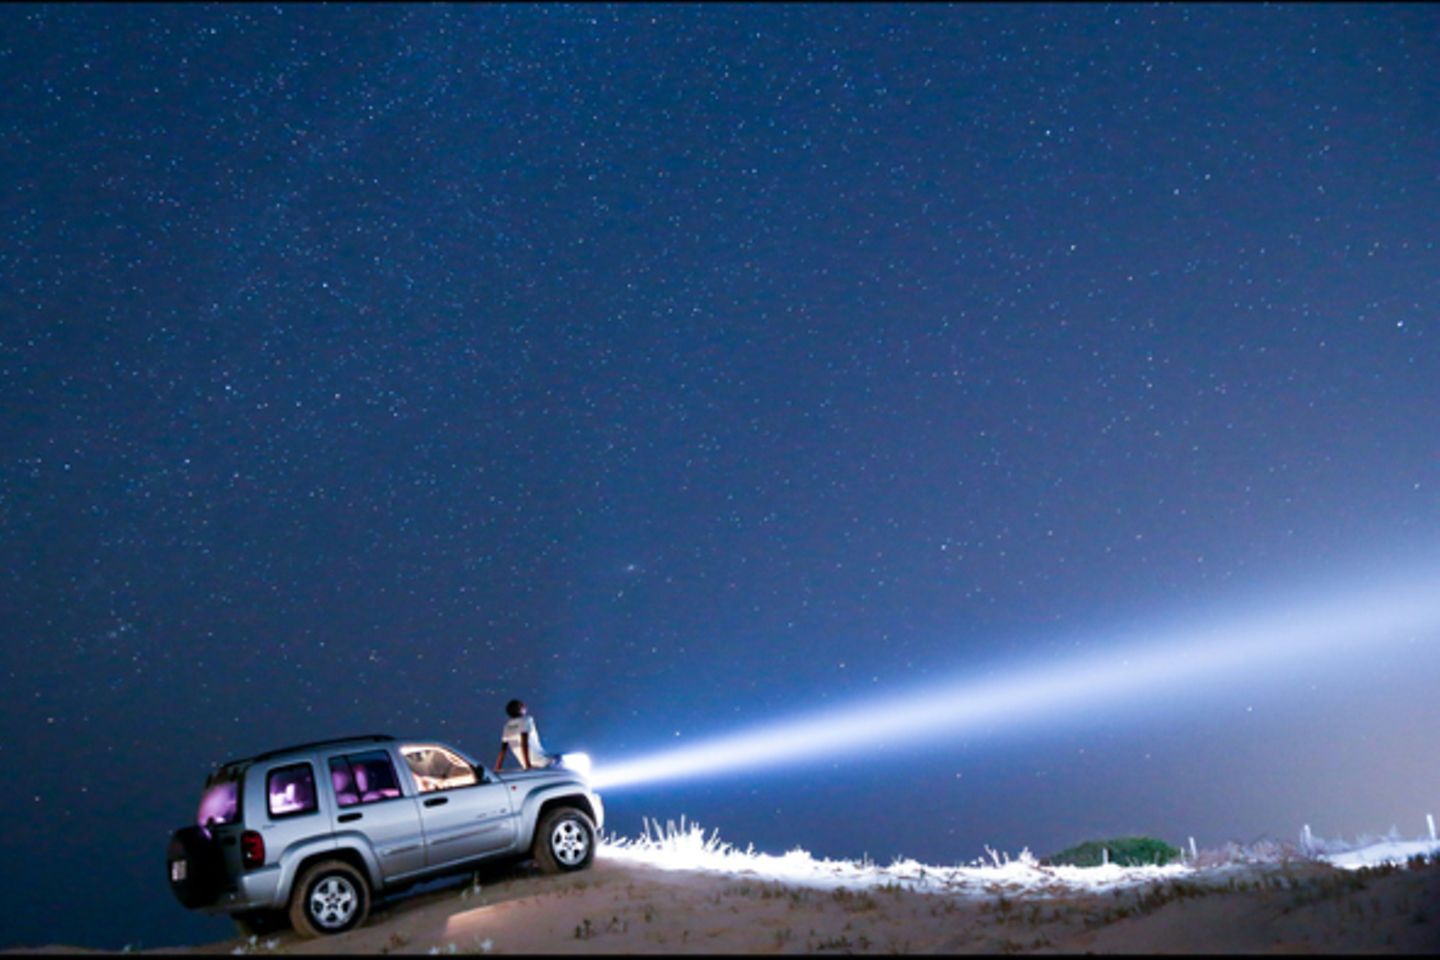 Car on a dune, the headlights shine far into the night sky. Someone sits on the bonnet